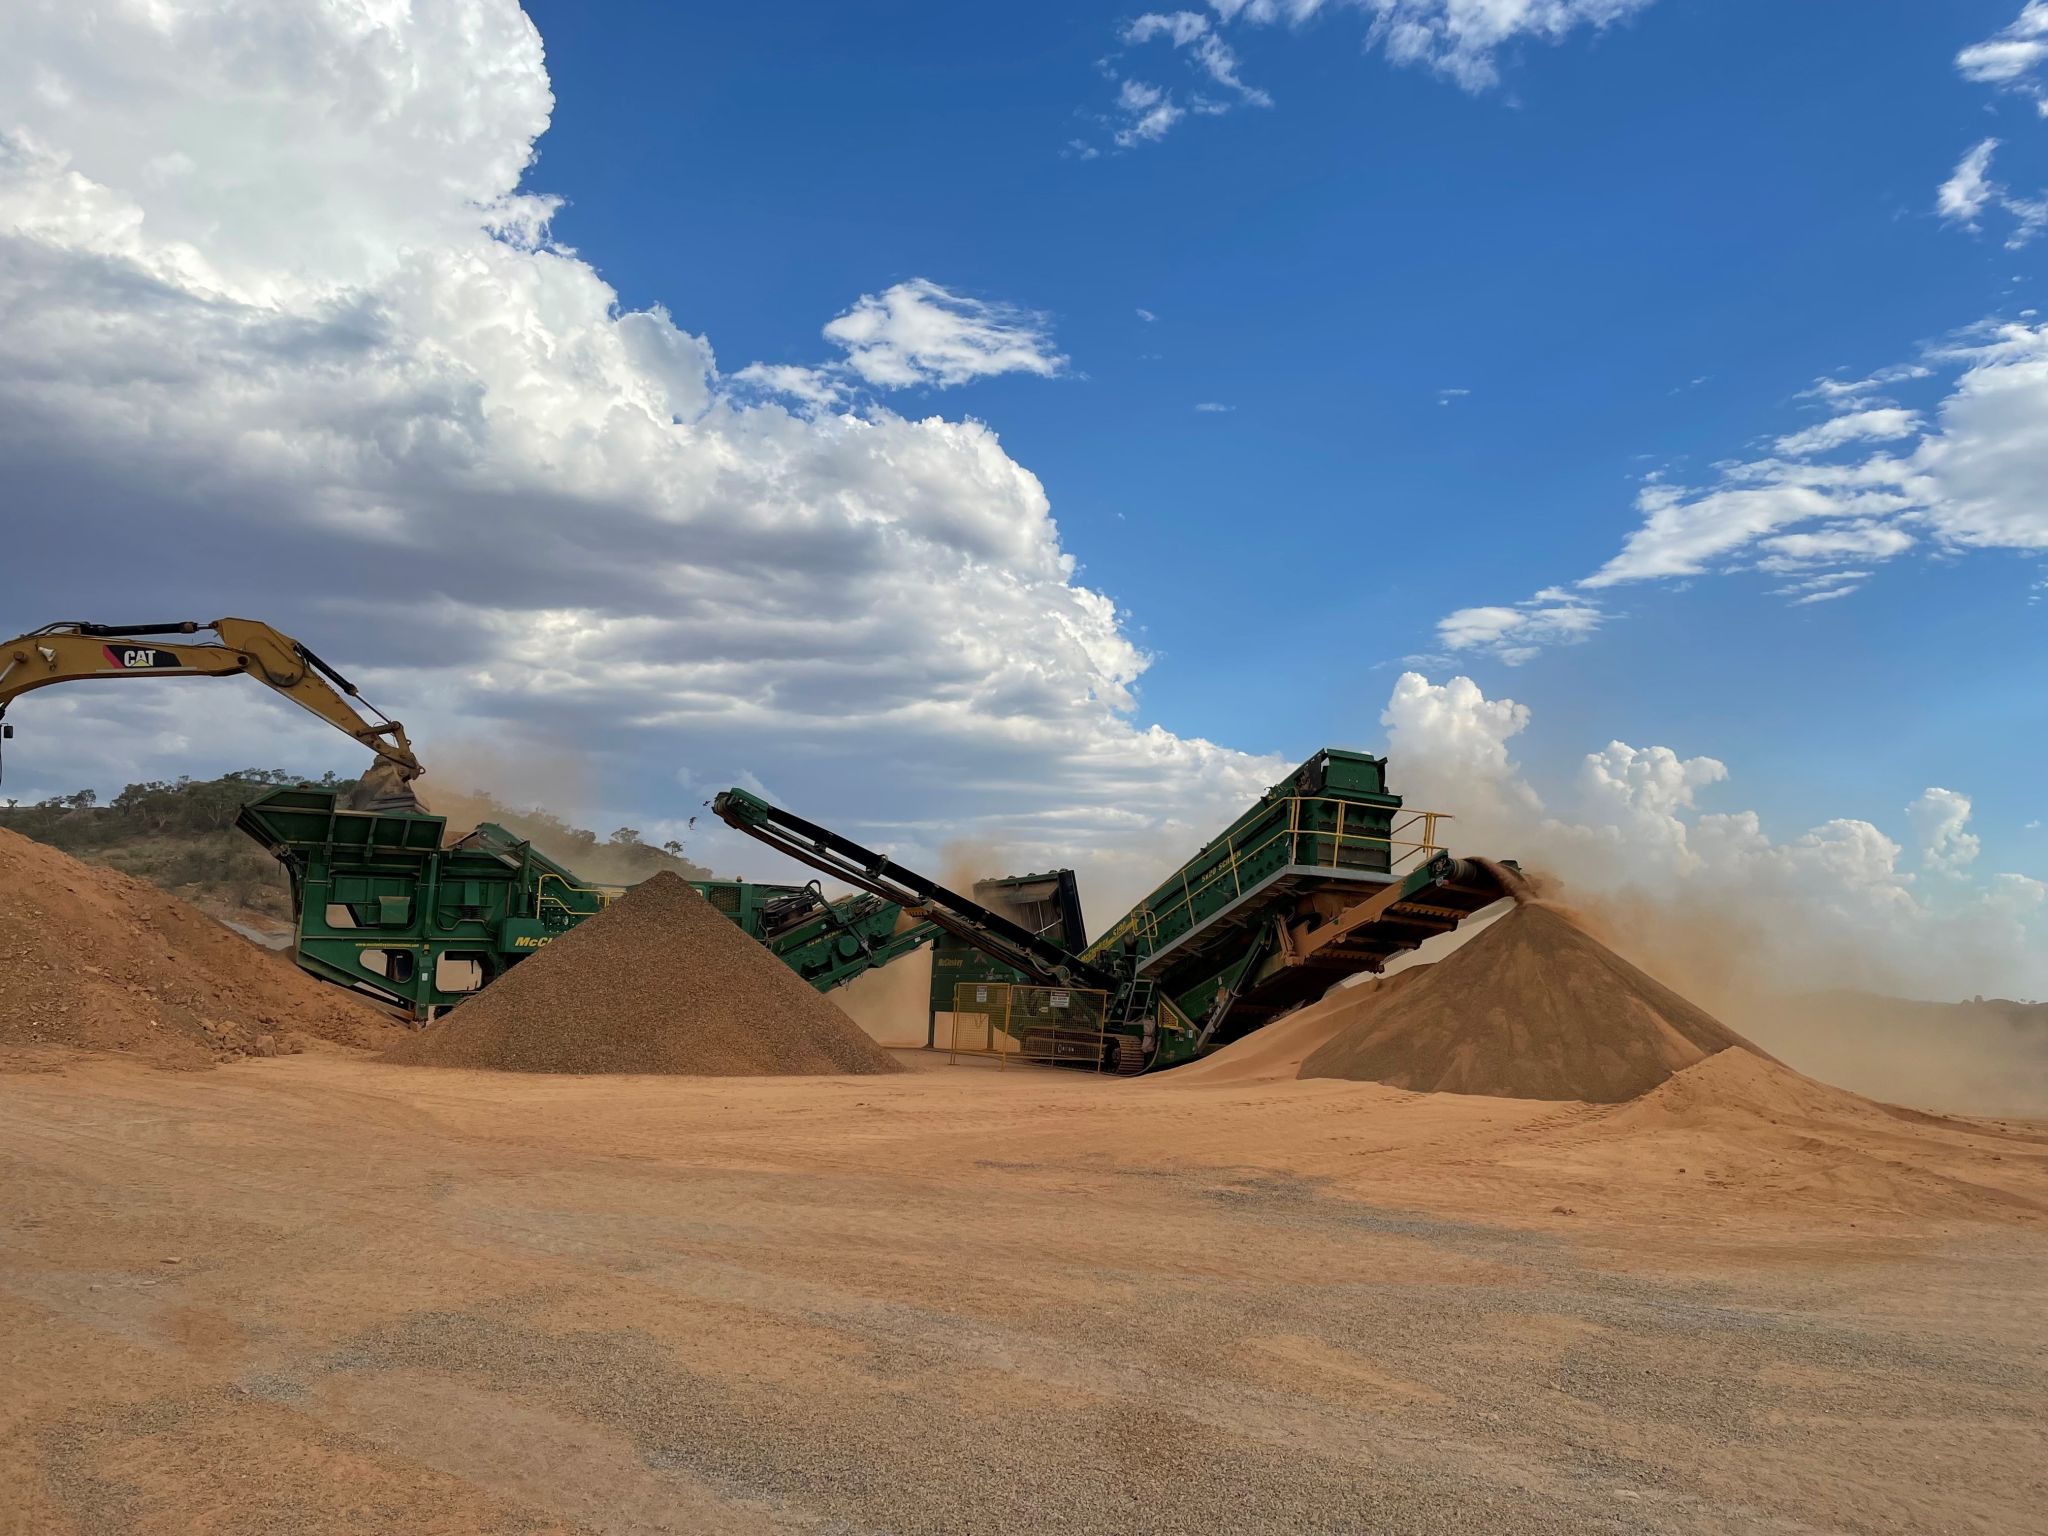 Ardmore Phosphate Rock Project in North West Queensland mined its first parcel of high-grade phosphate rock last year